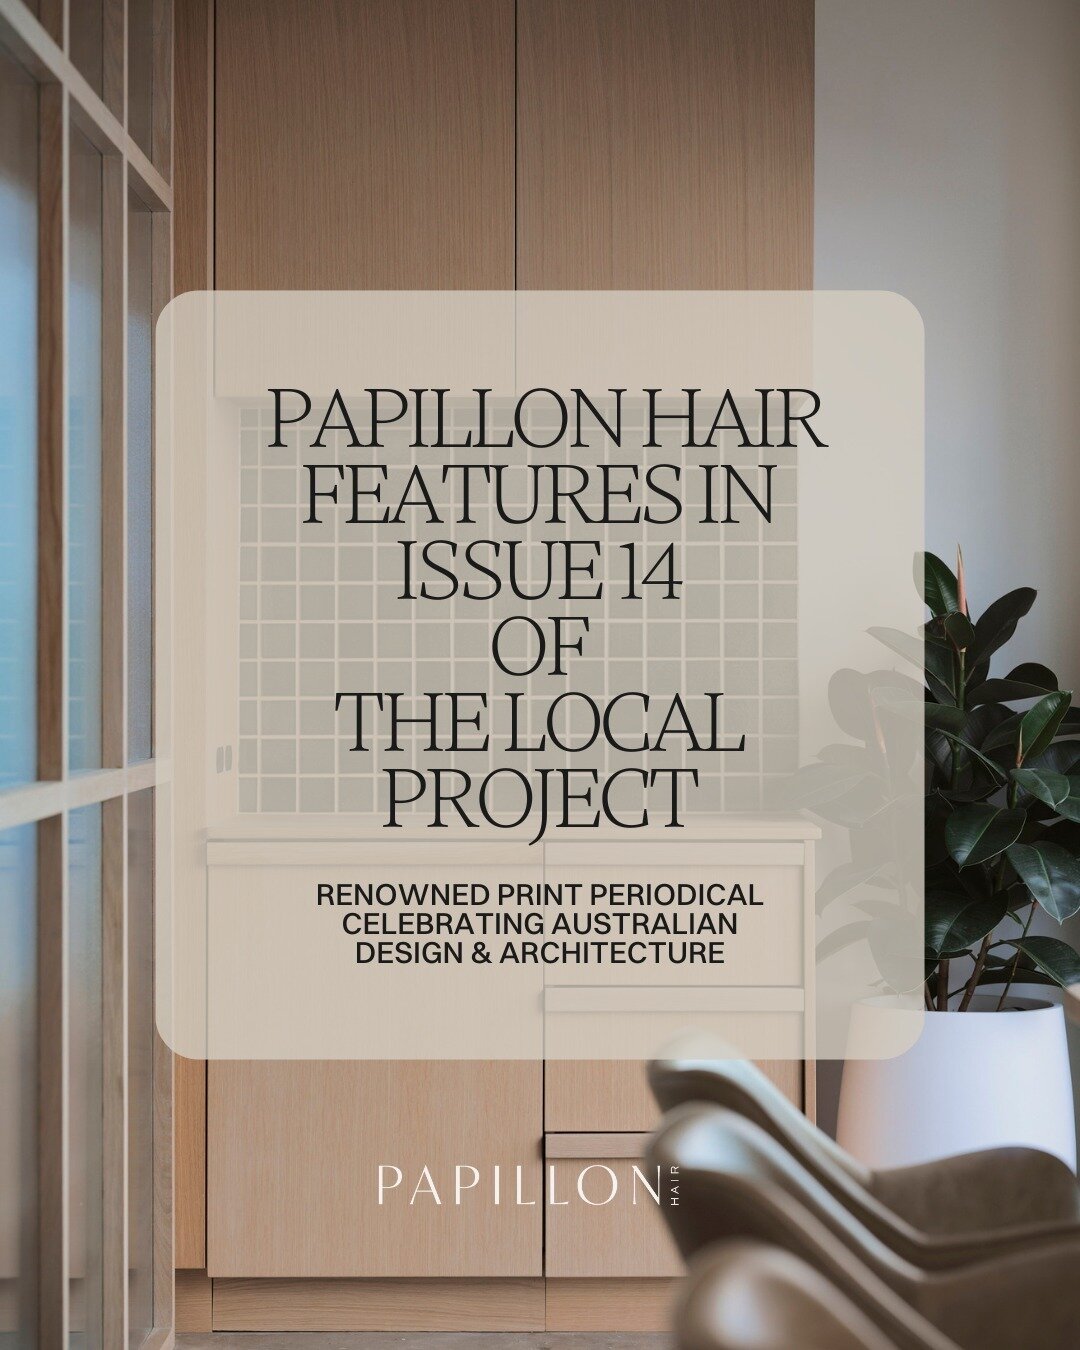 Well, isn't this a thrill!?!? 

The Local Project is published three times per year; a curated insight into the latest architecture and design in Australia, New Zealand and North America. 

And Papillon Hair is there, recognised for its sophisticated